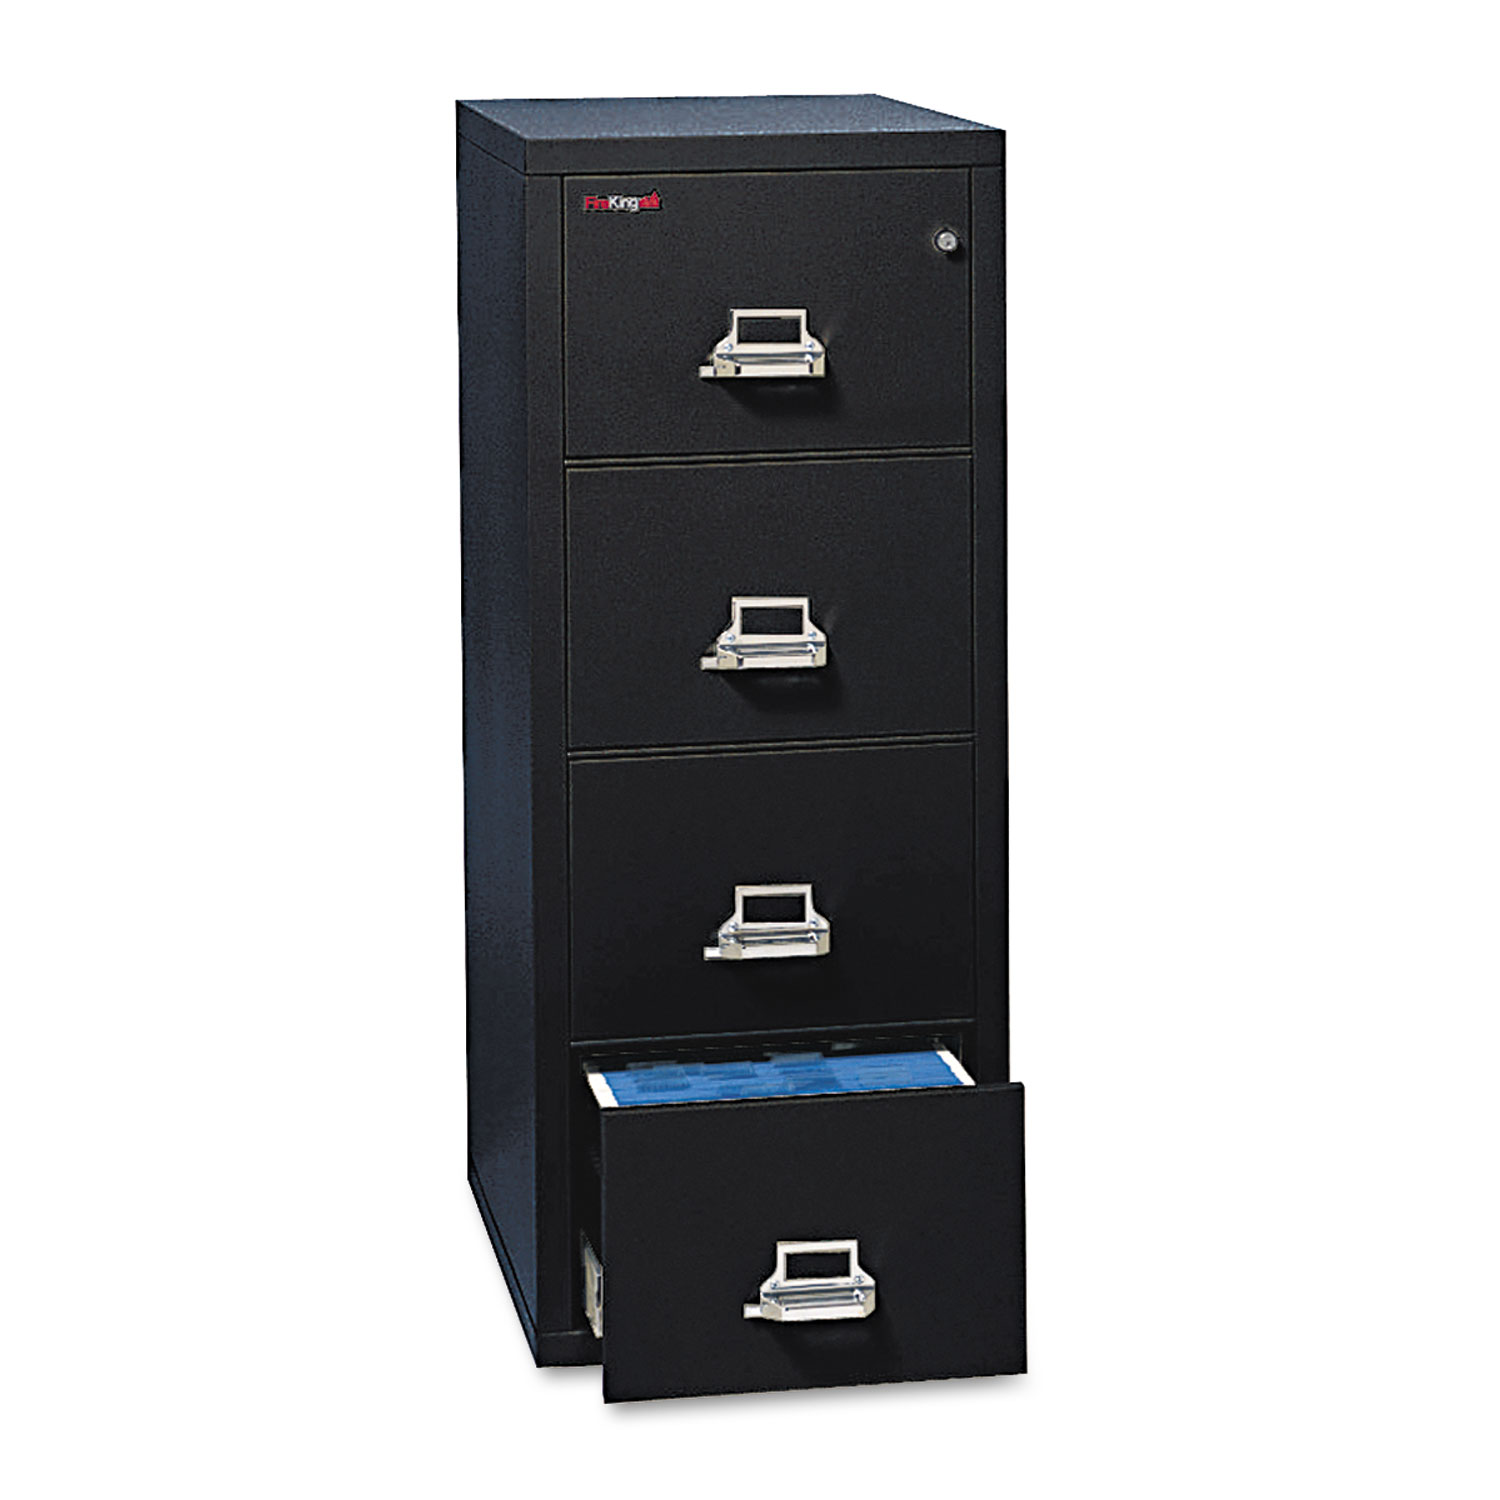 Four-Drawer Vertical File, 20-13/16w x 31-9/16d, UL 350° for Fire, Legal, Black